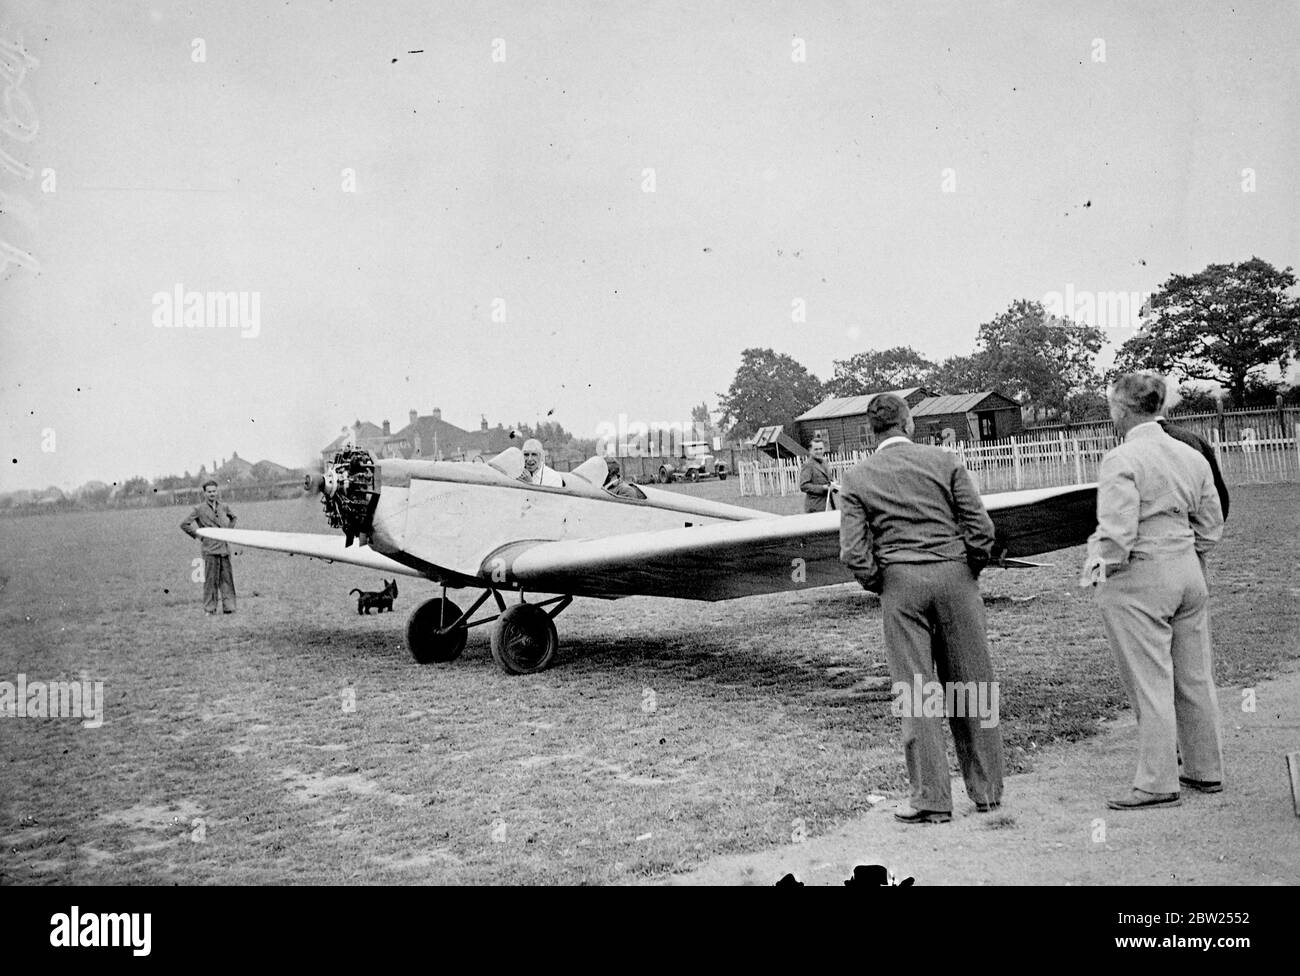 Two men take off from Southend in Â£10 plane to tour Germany. After spending months rebuilding and testing an aeroplane which they bought as a 'wreck' for Â£10, two members of Southend Flying Club, Mr Jim Myall and Mr Roper Brown, both of Southend, left Southend Airport for a two week tour of Germany. When they bought the aeroplane, a 40 hp Salmson Klemm , which is about 10 years old, it was in small pieces. It is now a worthy again, with a cruising speed of about 80 mph. Photo shows, the Â£10 machine before takeoff. 2 August 1938 Stock Photo